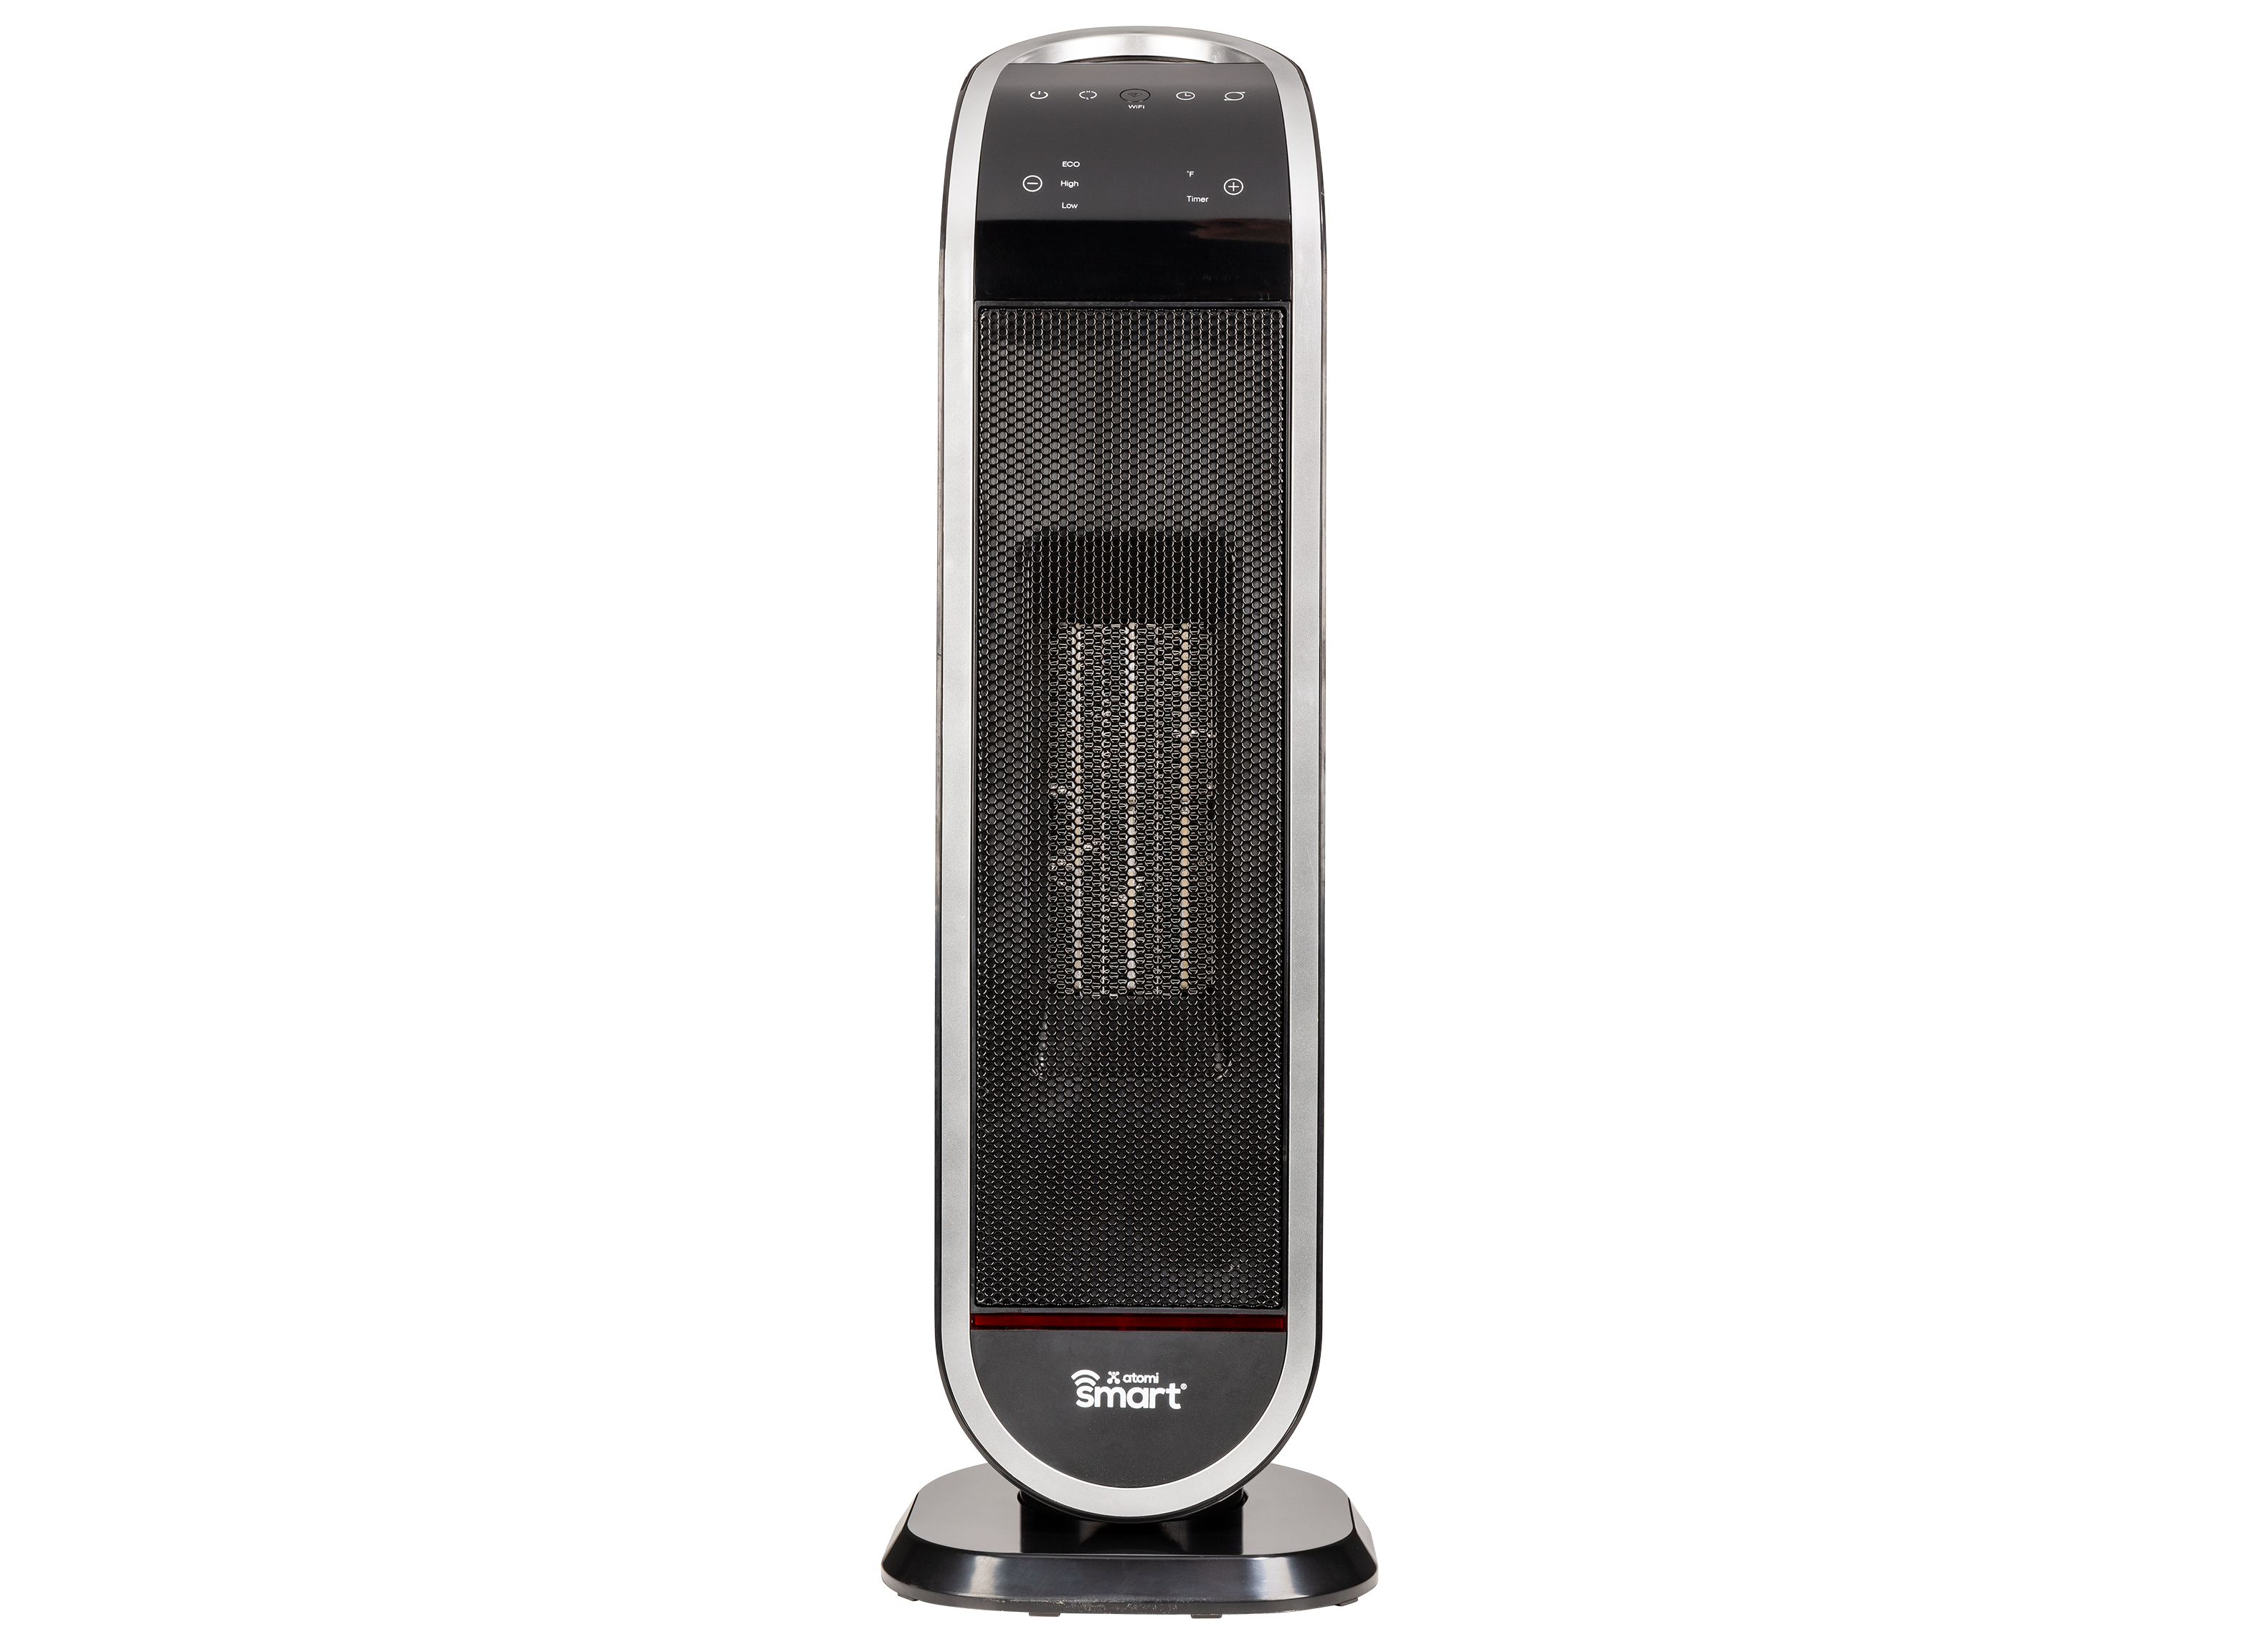 https://crdms.images.consumerreports.org/prod/products/cr/models/404619-larger-heaters-atomi-smart-at1481-10025264.png